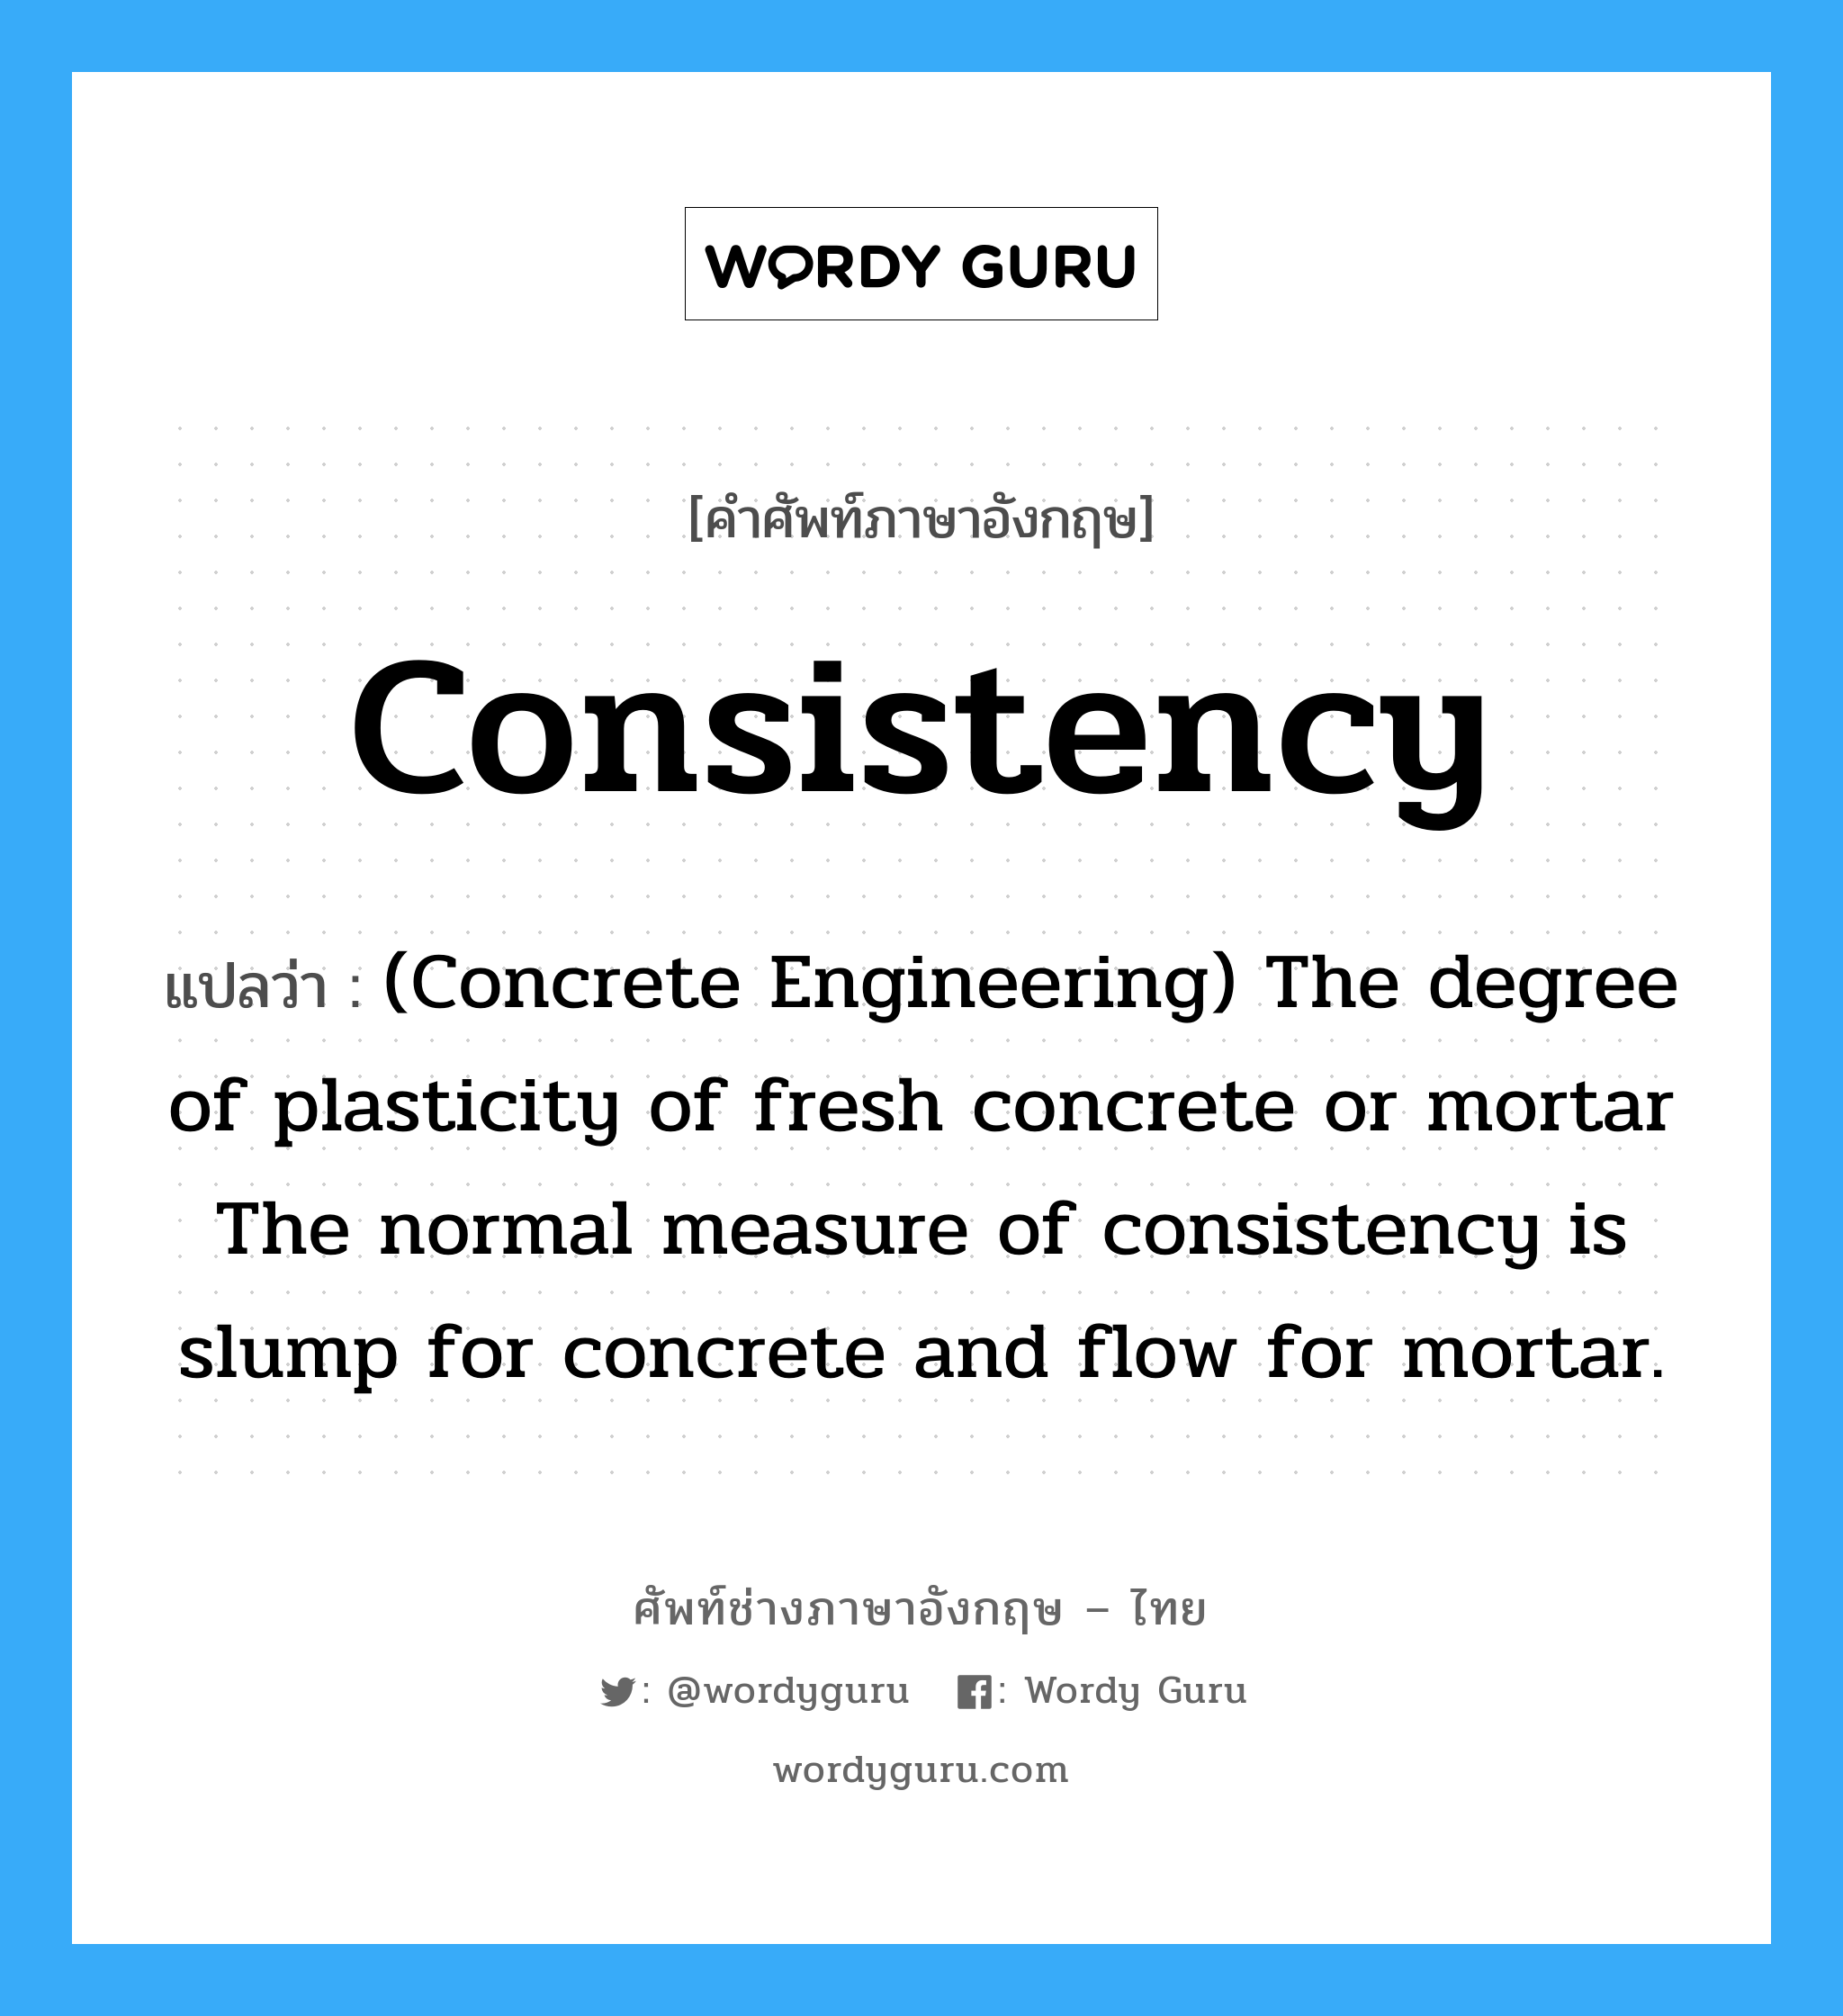 Consistency แปลว่า?, คำศัพท์ช่างภาษาอังกฤษ - ไทย Consistency คำศัพท์ภาษาอังกฤษ Consistency แปลว่า (Concrete Engineering) The degree of plasticity of fresh concrete or mortar The normal measure of consistency is slump for concrete and flow for mortar.